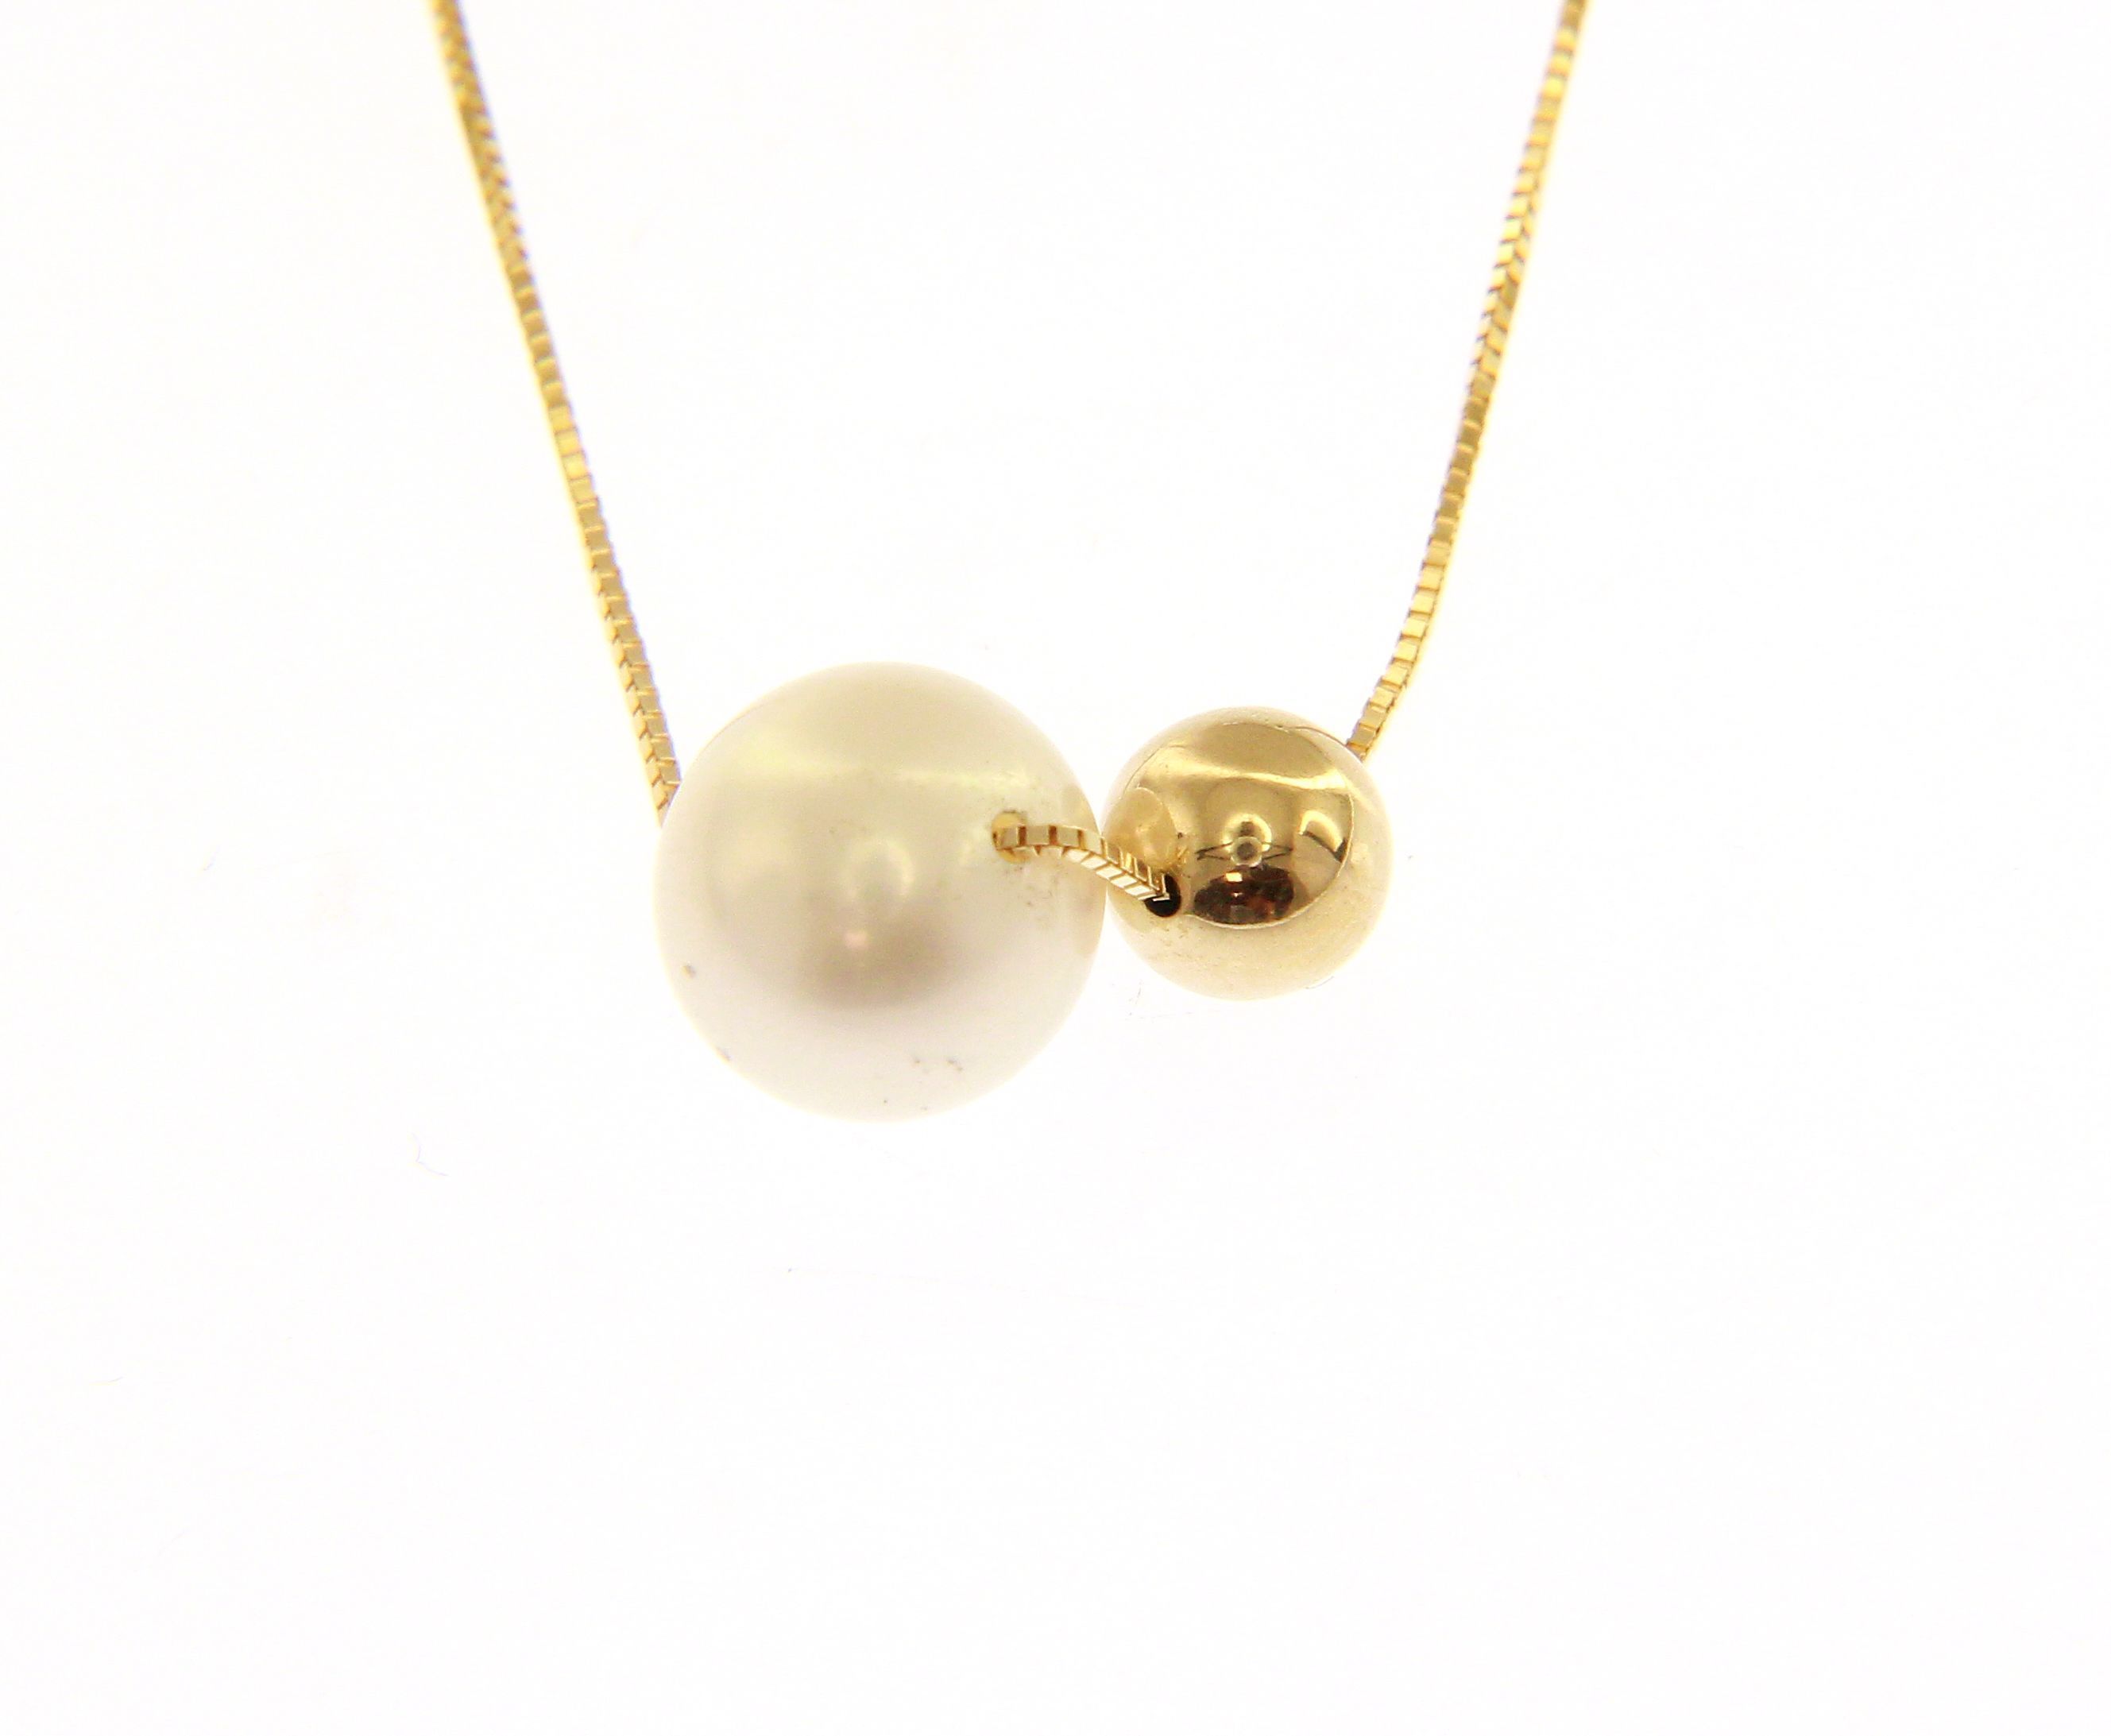 Golden necklace k14 with a pearl and a golden ball  (code S202802)